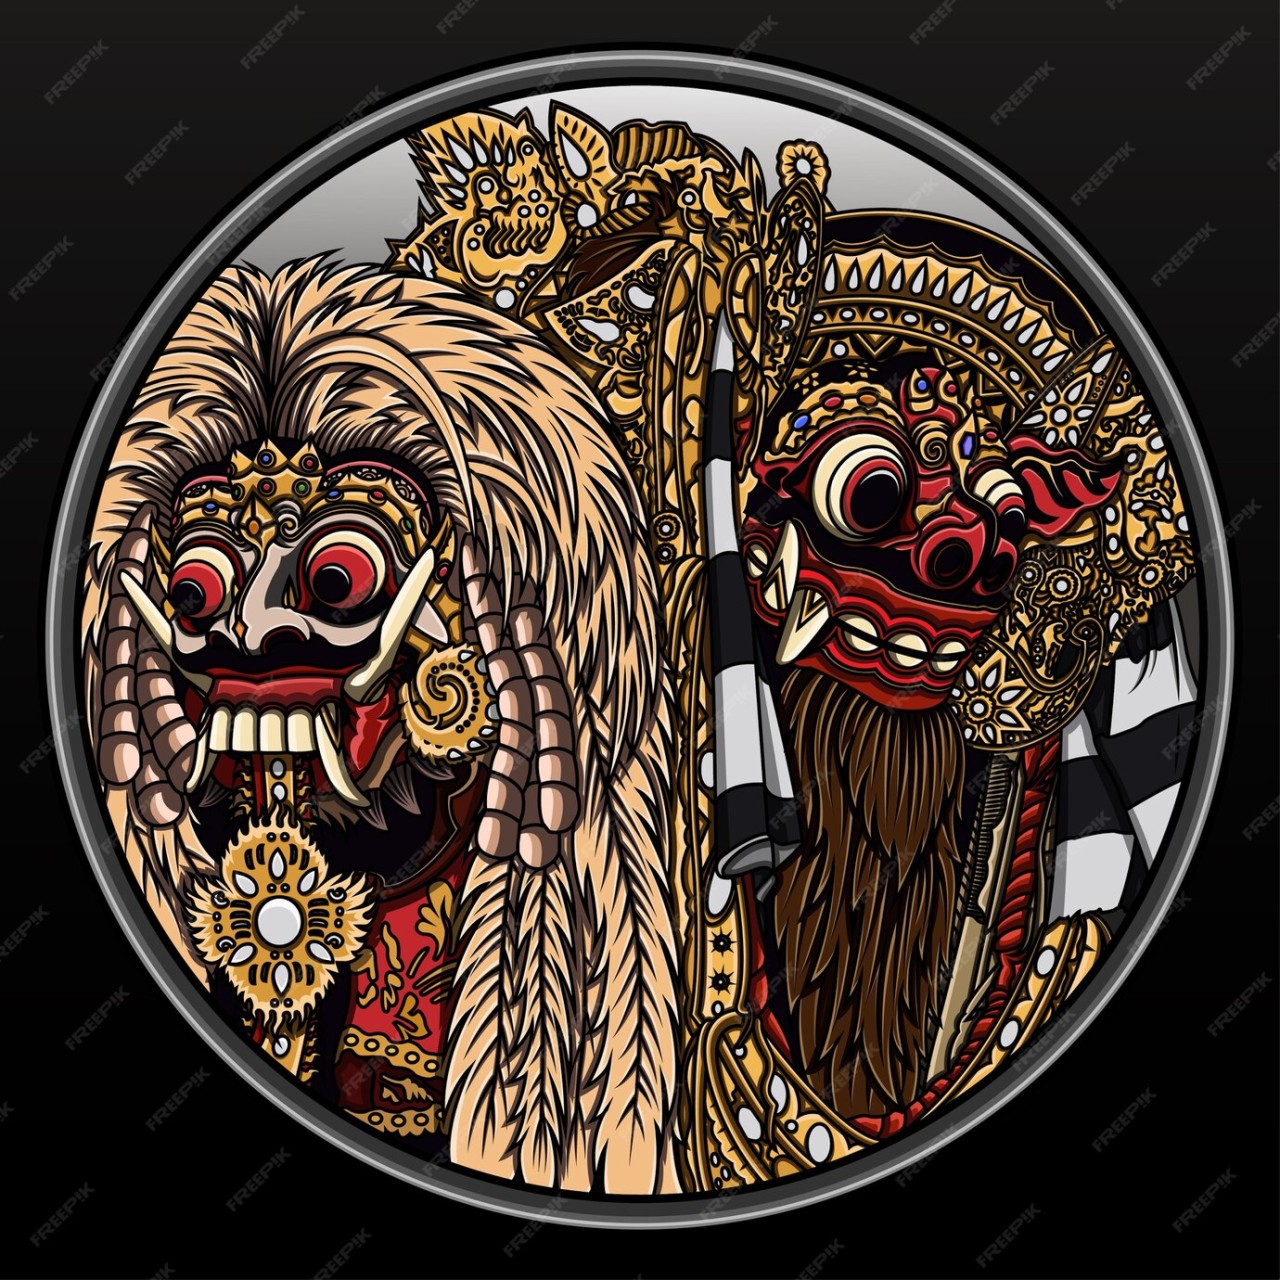 Barong and Rangda: The Timeless Battle of Good and Evil